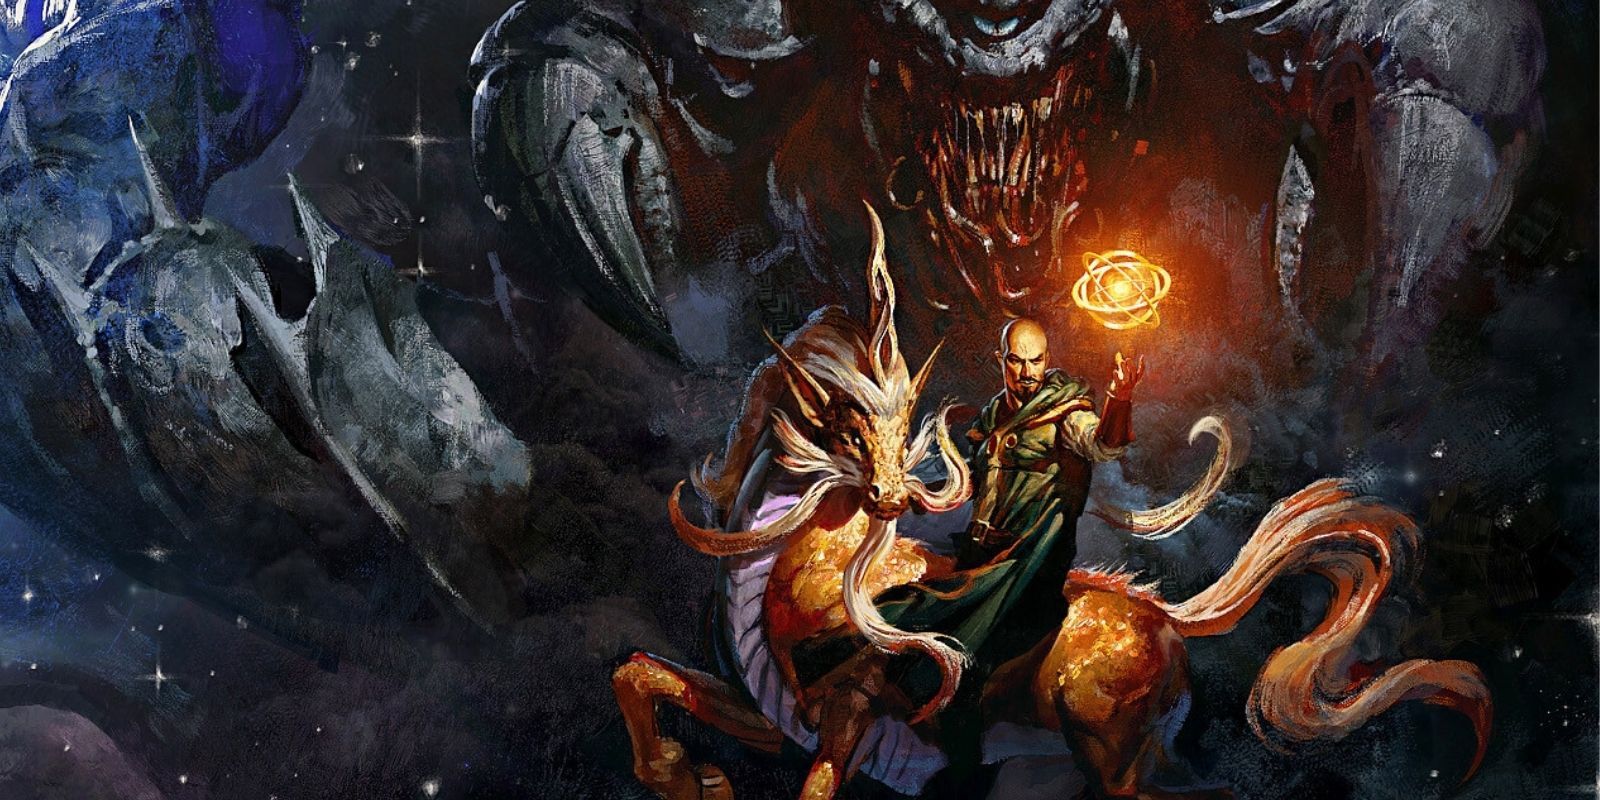 Dungeons & Dragons' Monsters of the Multiverse